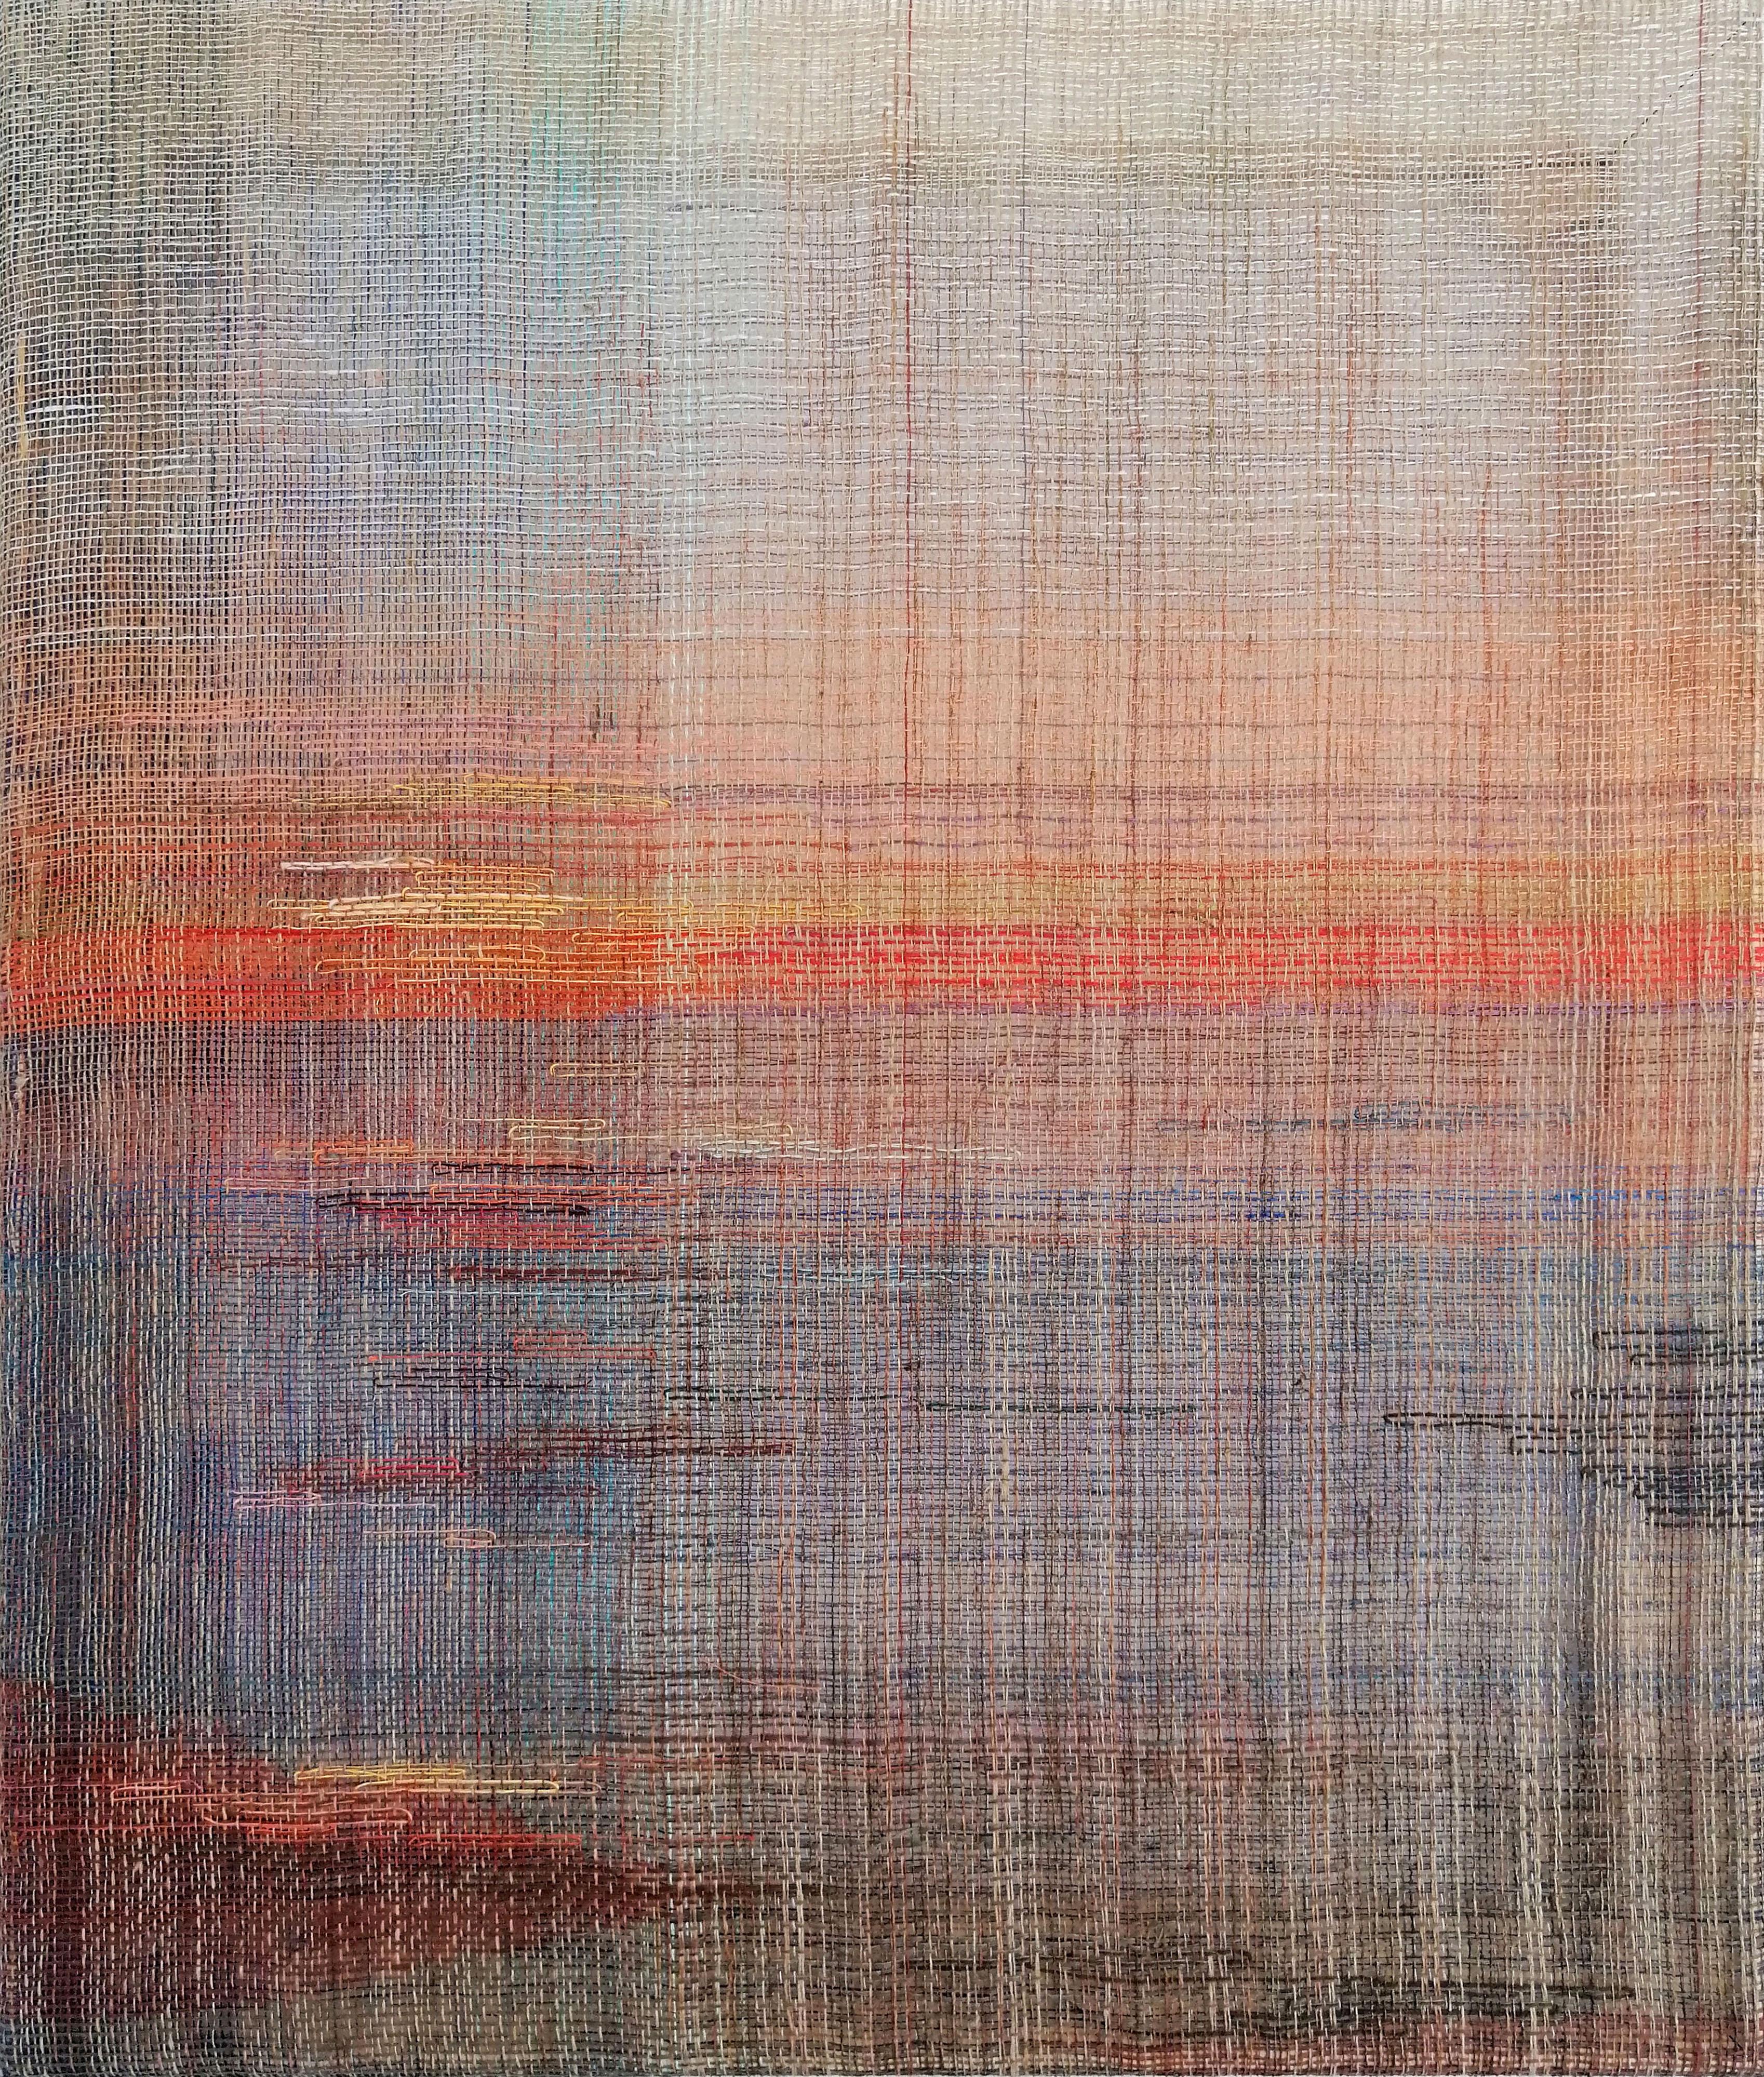 Marta Pokojowczyk Landscape Painting - Sunset - Handwoven  Abstract Landscape, Contemporary Woven and Painted Artwork